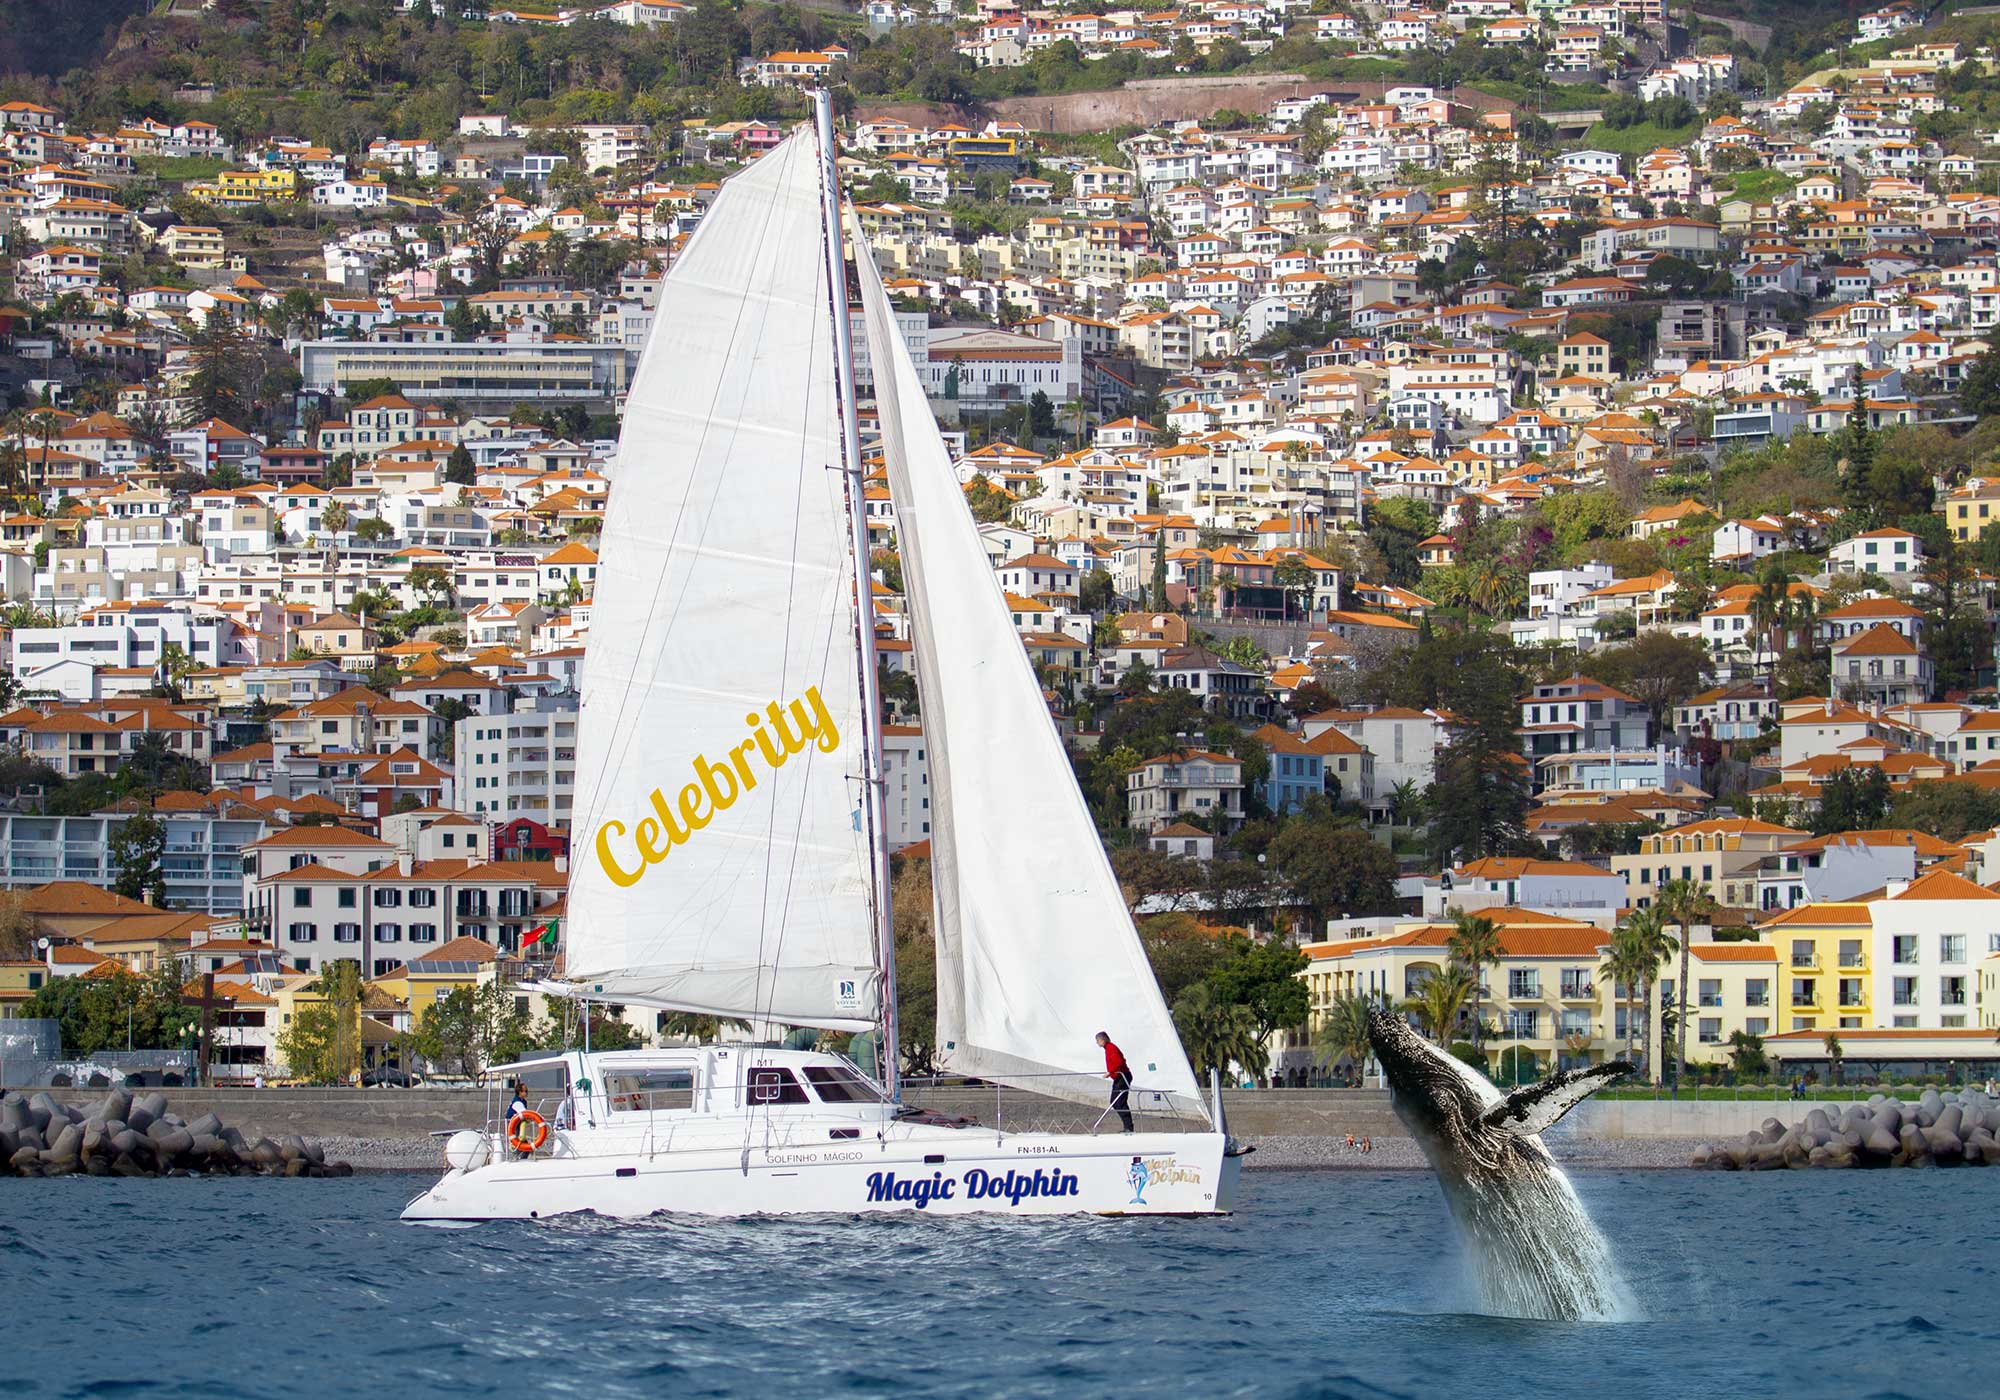 Exclusive cruising on the Magic Dolphin Celebrity catamaran on a private tour for up to 35 guests.